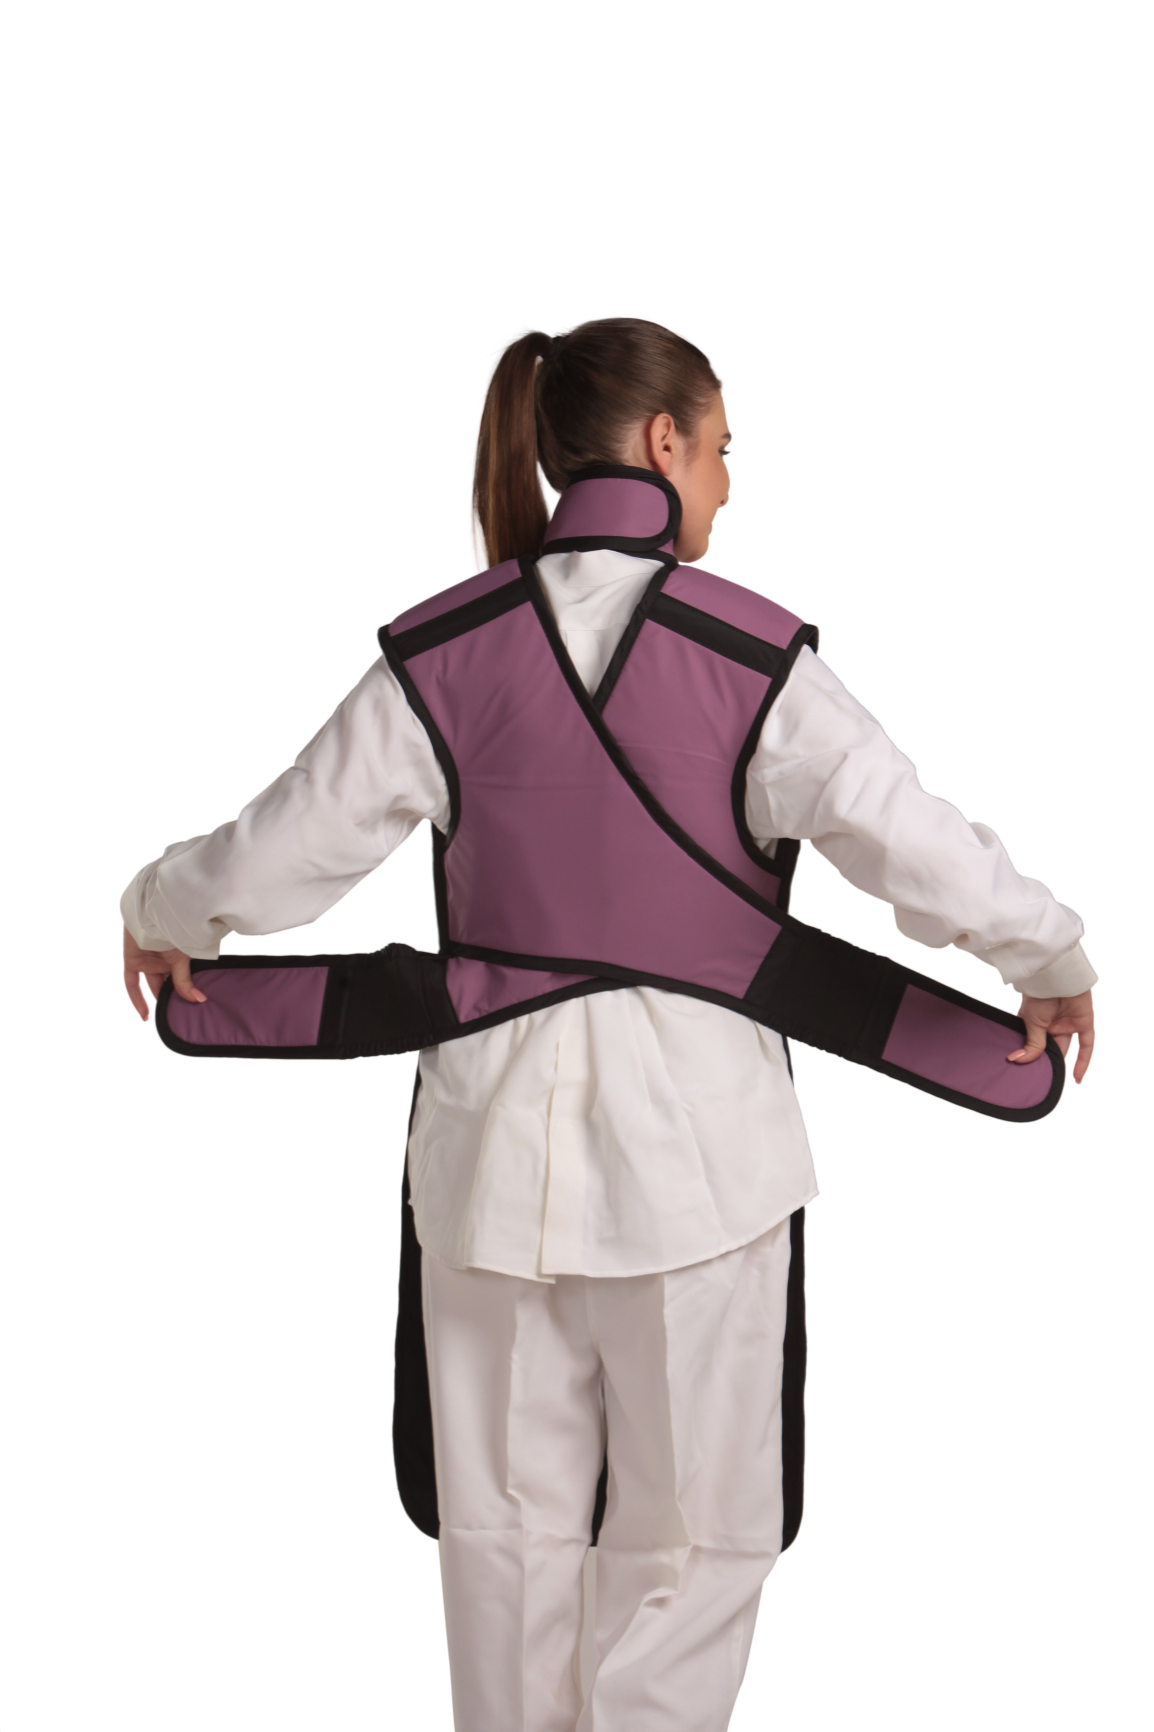 Back view of a female model wearing a coat apron with a flex back and an integrated thyroid guard. The apron is mauve in color with a Jet black center line and has unfastened velcro fasteners by the sides held in the model's hands.